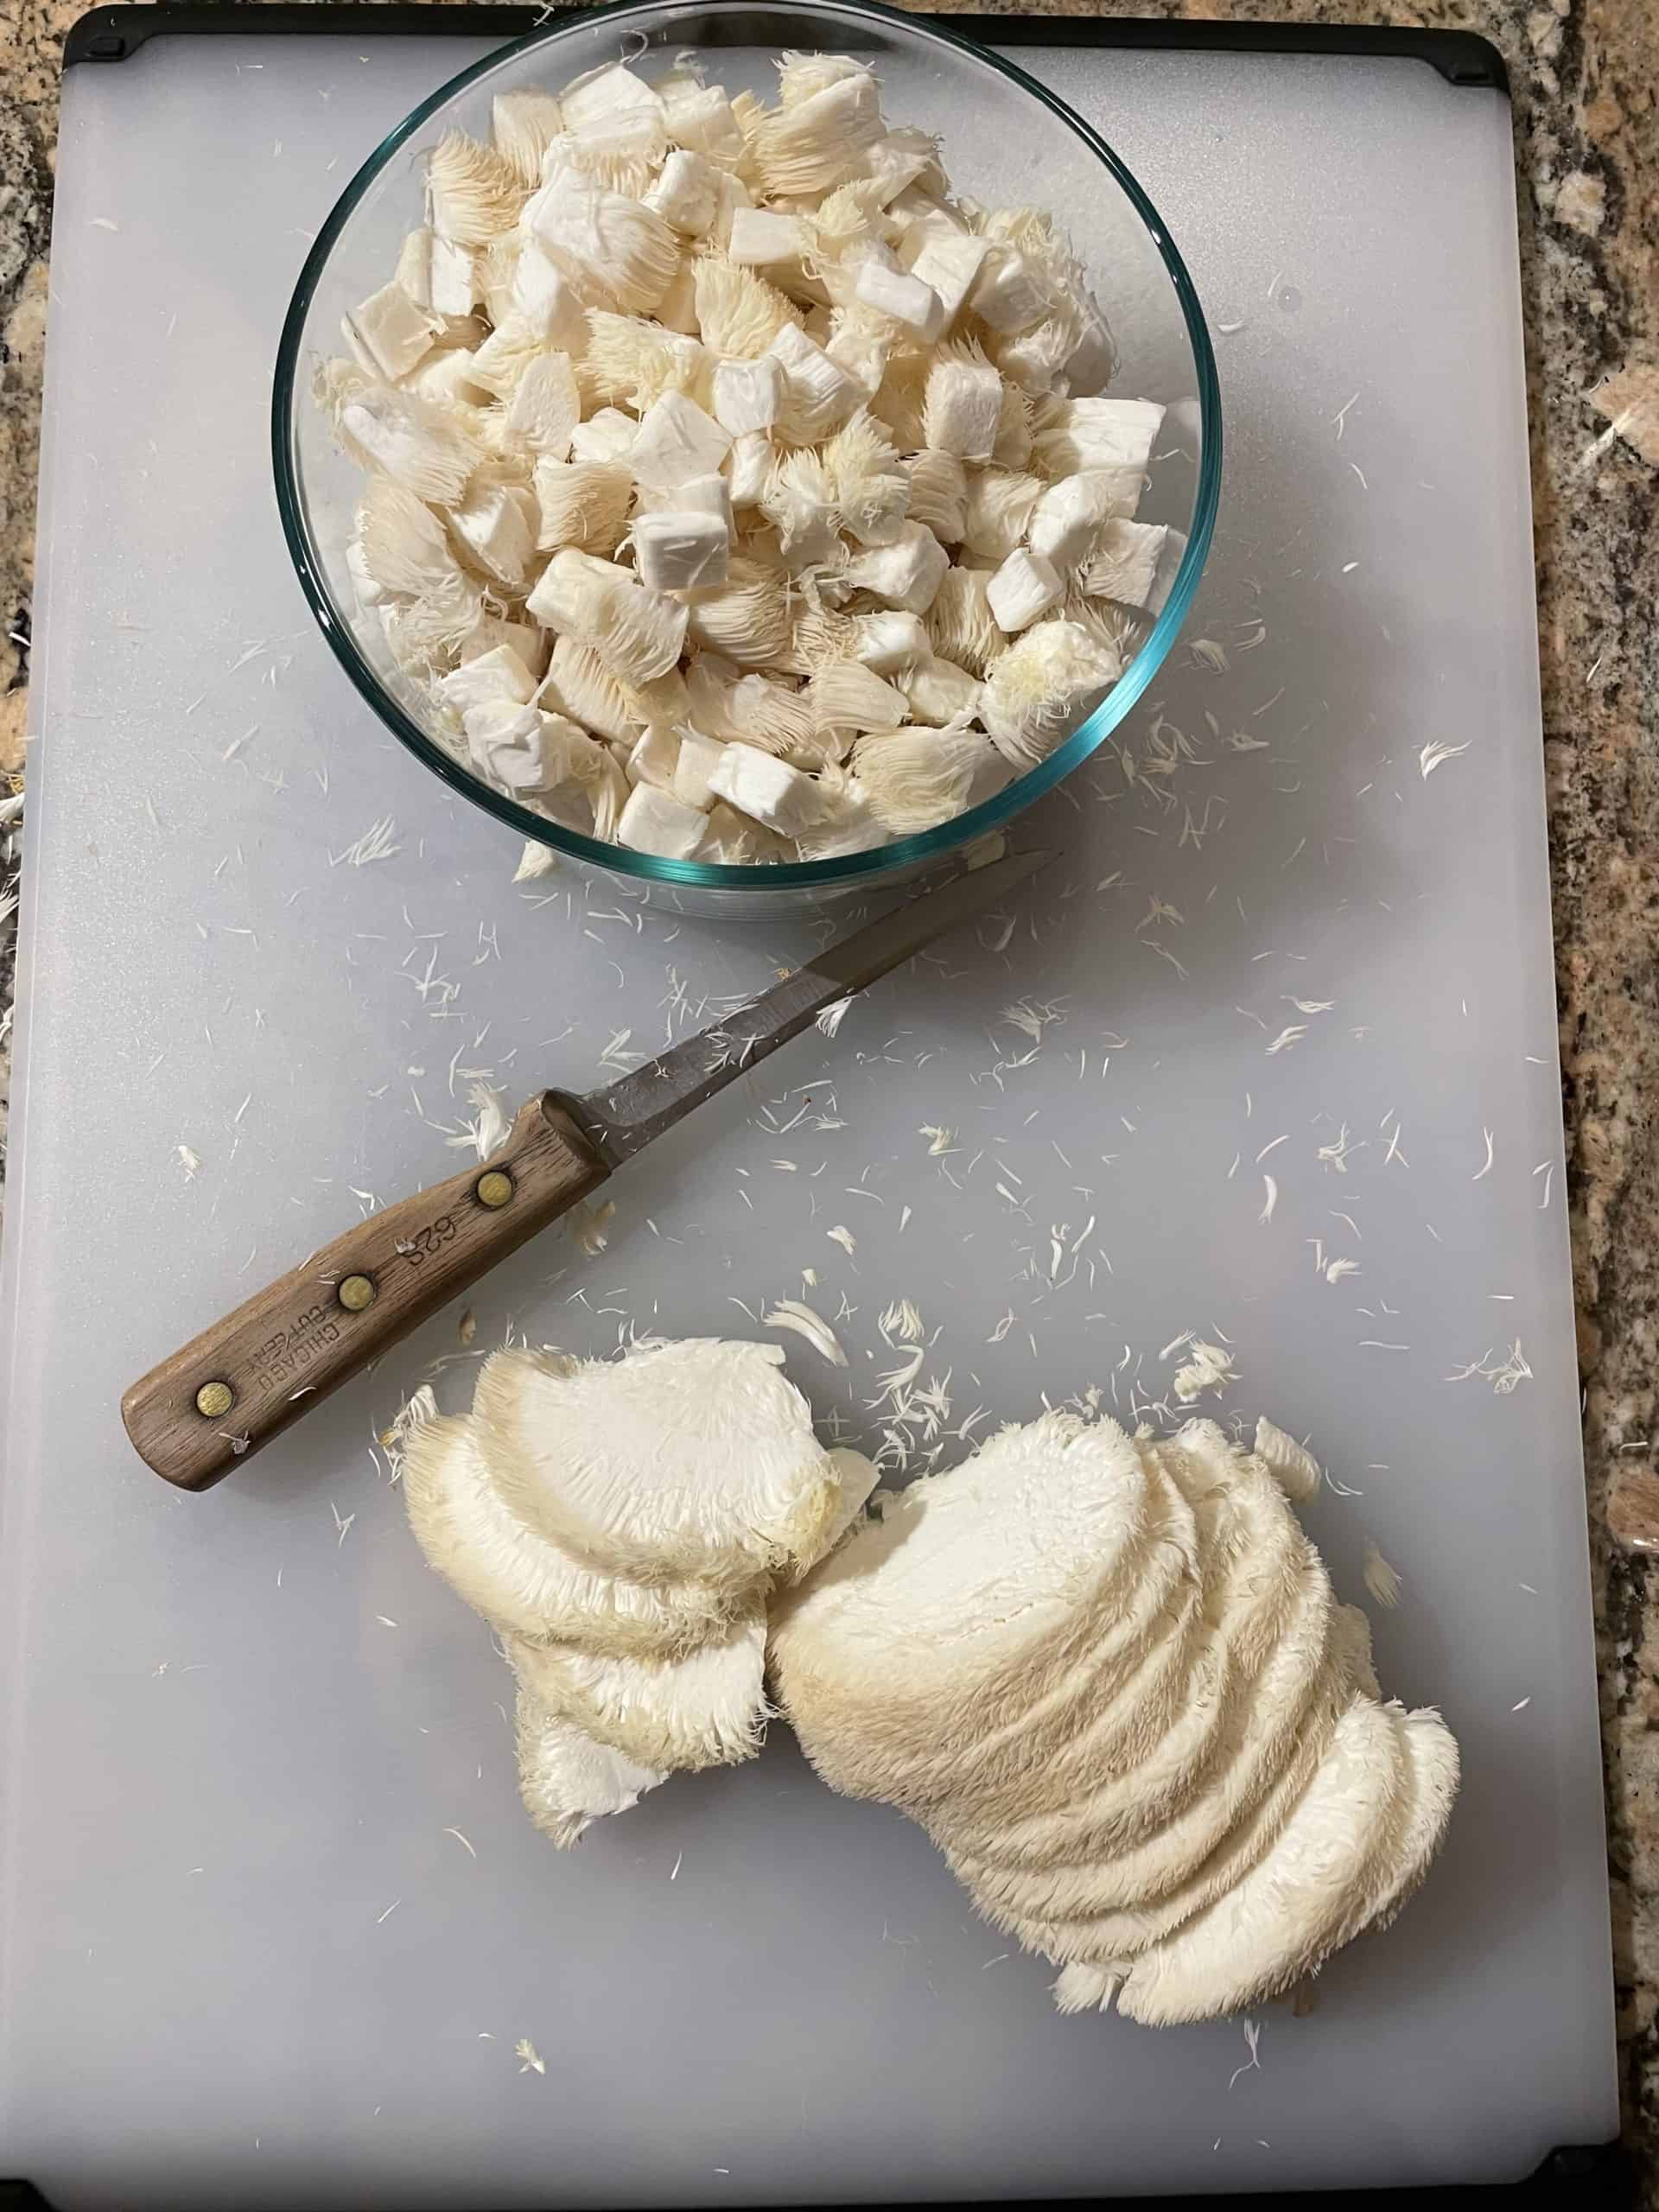 Diced and Slice Lion's Mane Mushrooms on a cutting board.